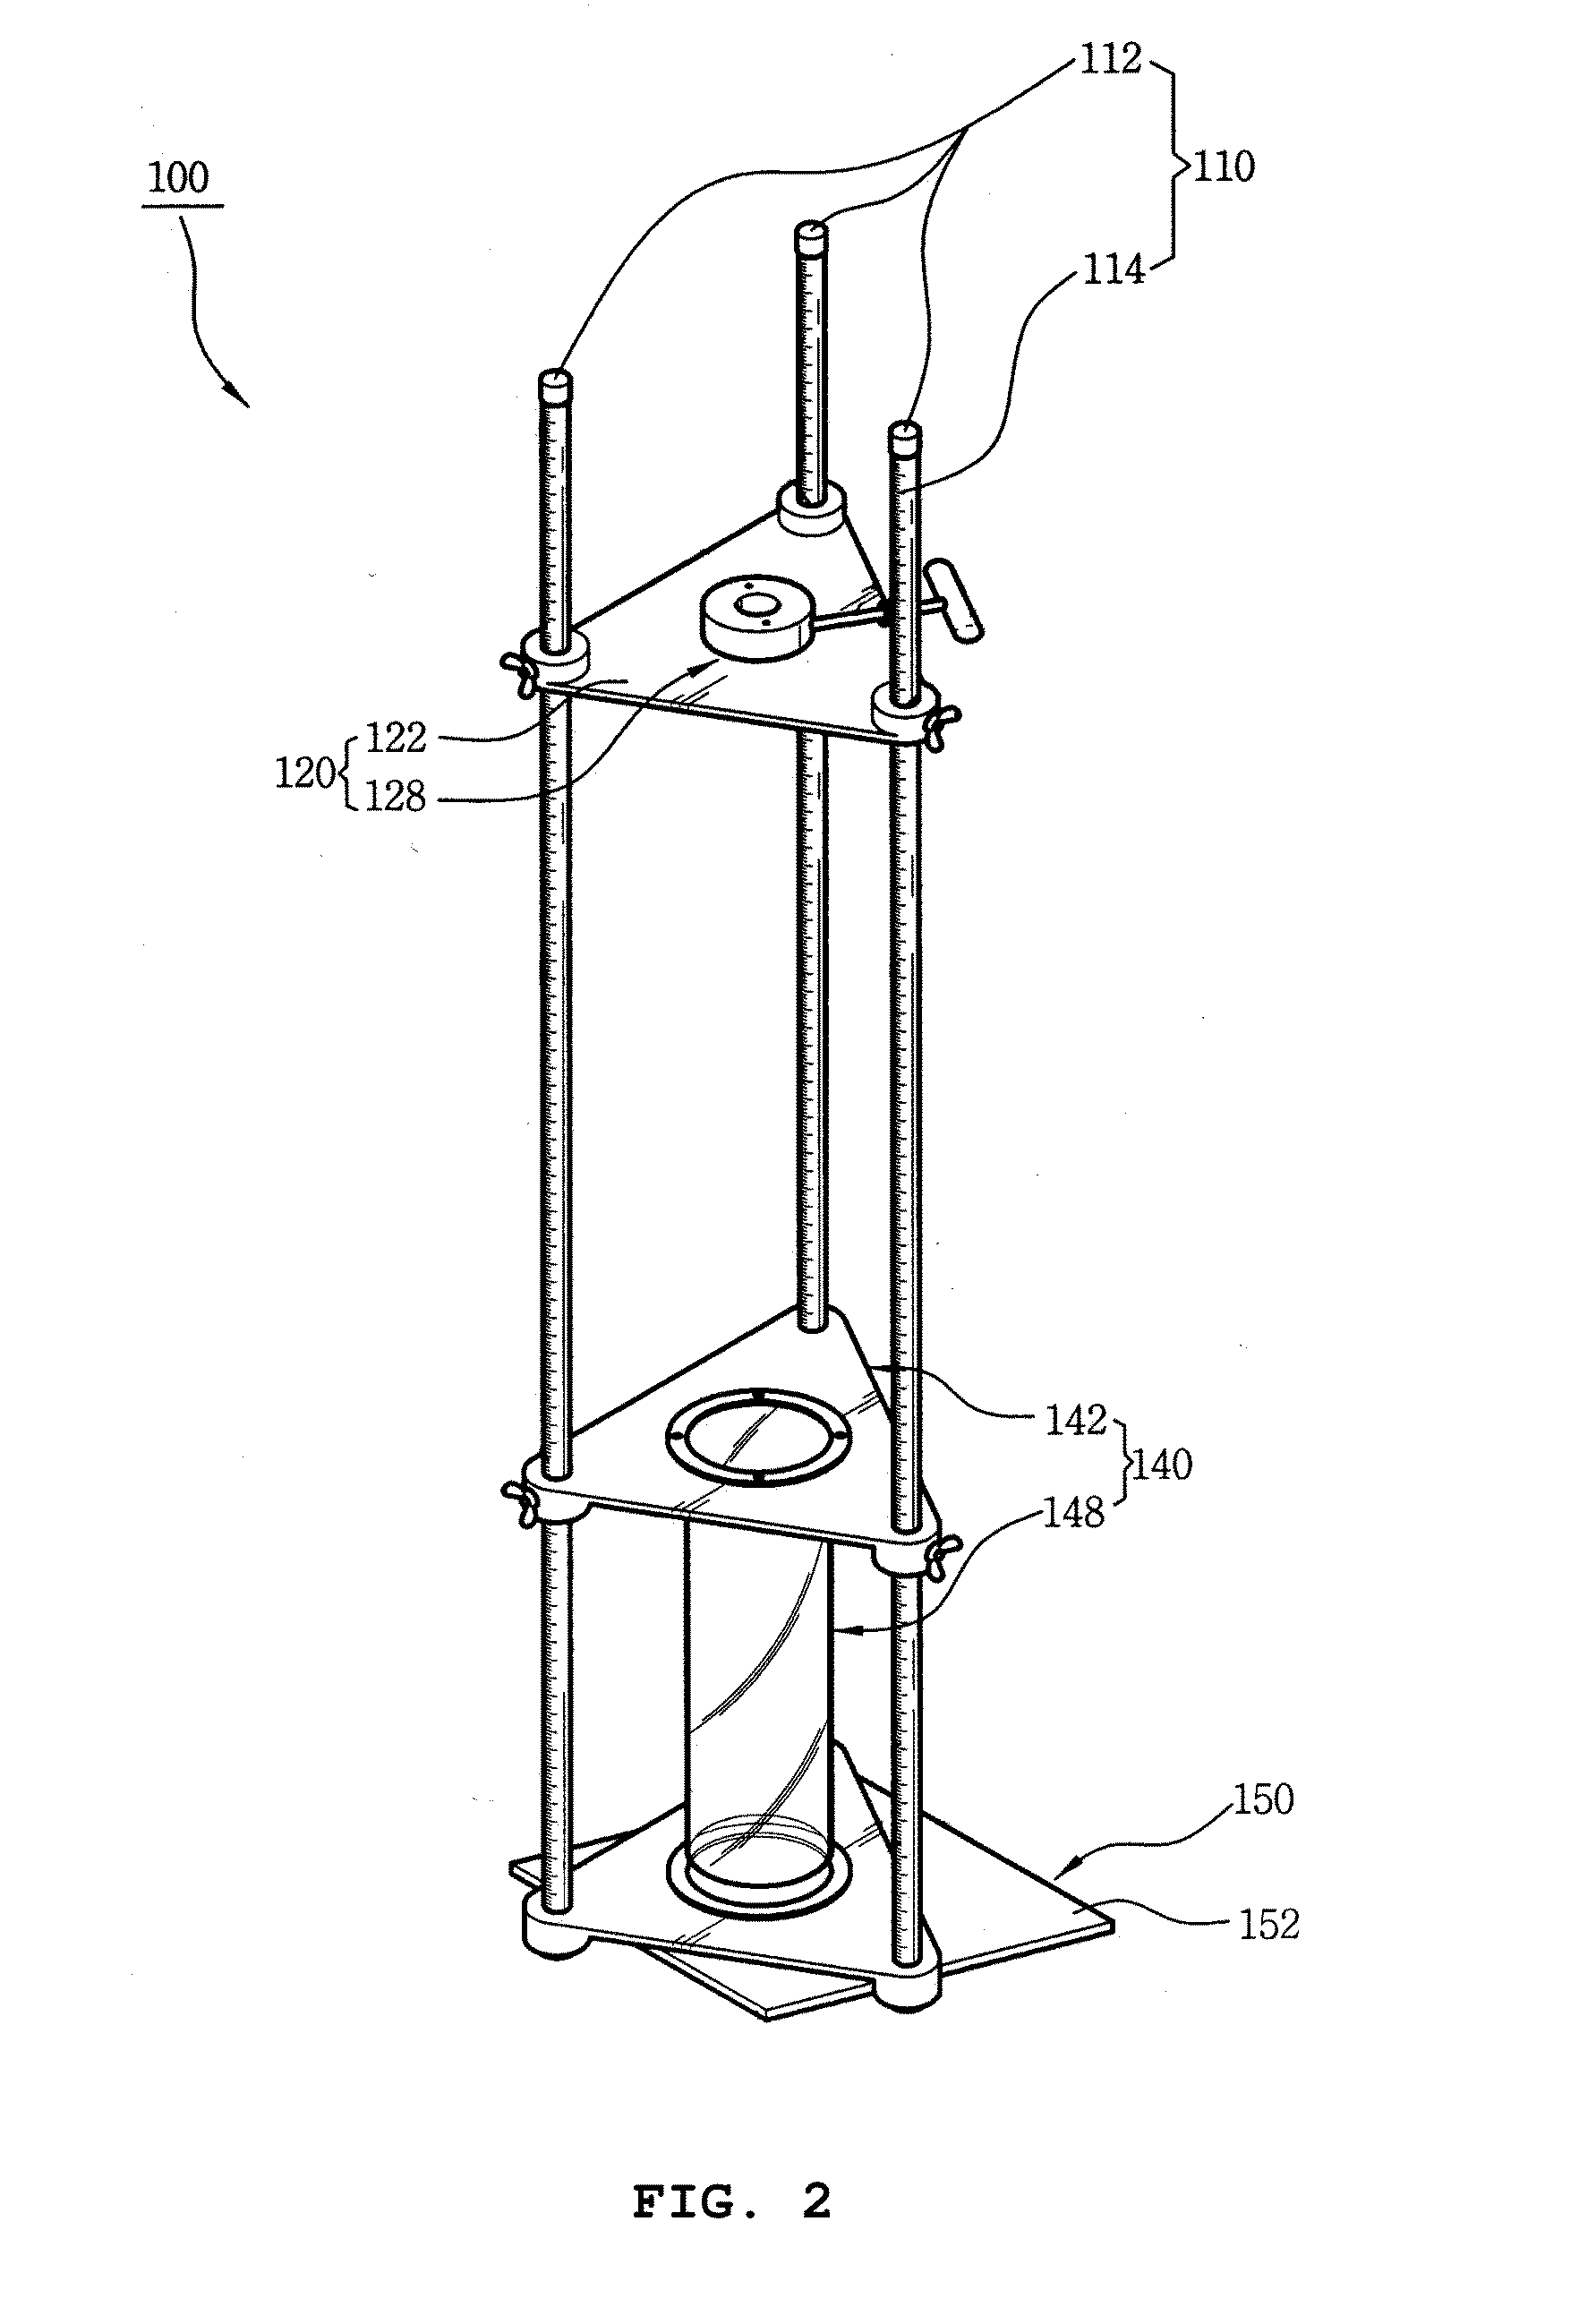 Free drop tester for allowing a free fall impact test of nuclear fuel pellet at adjustable angle